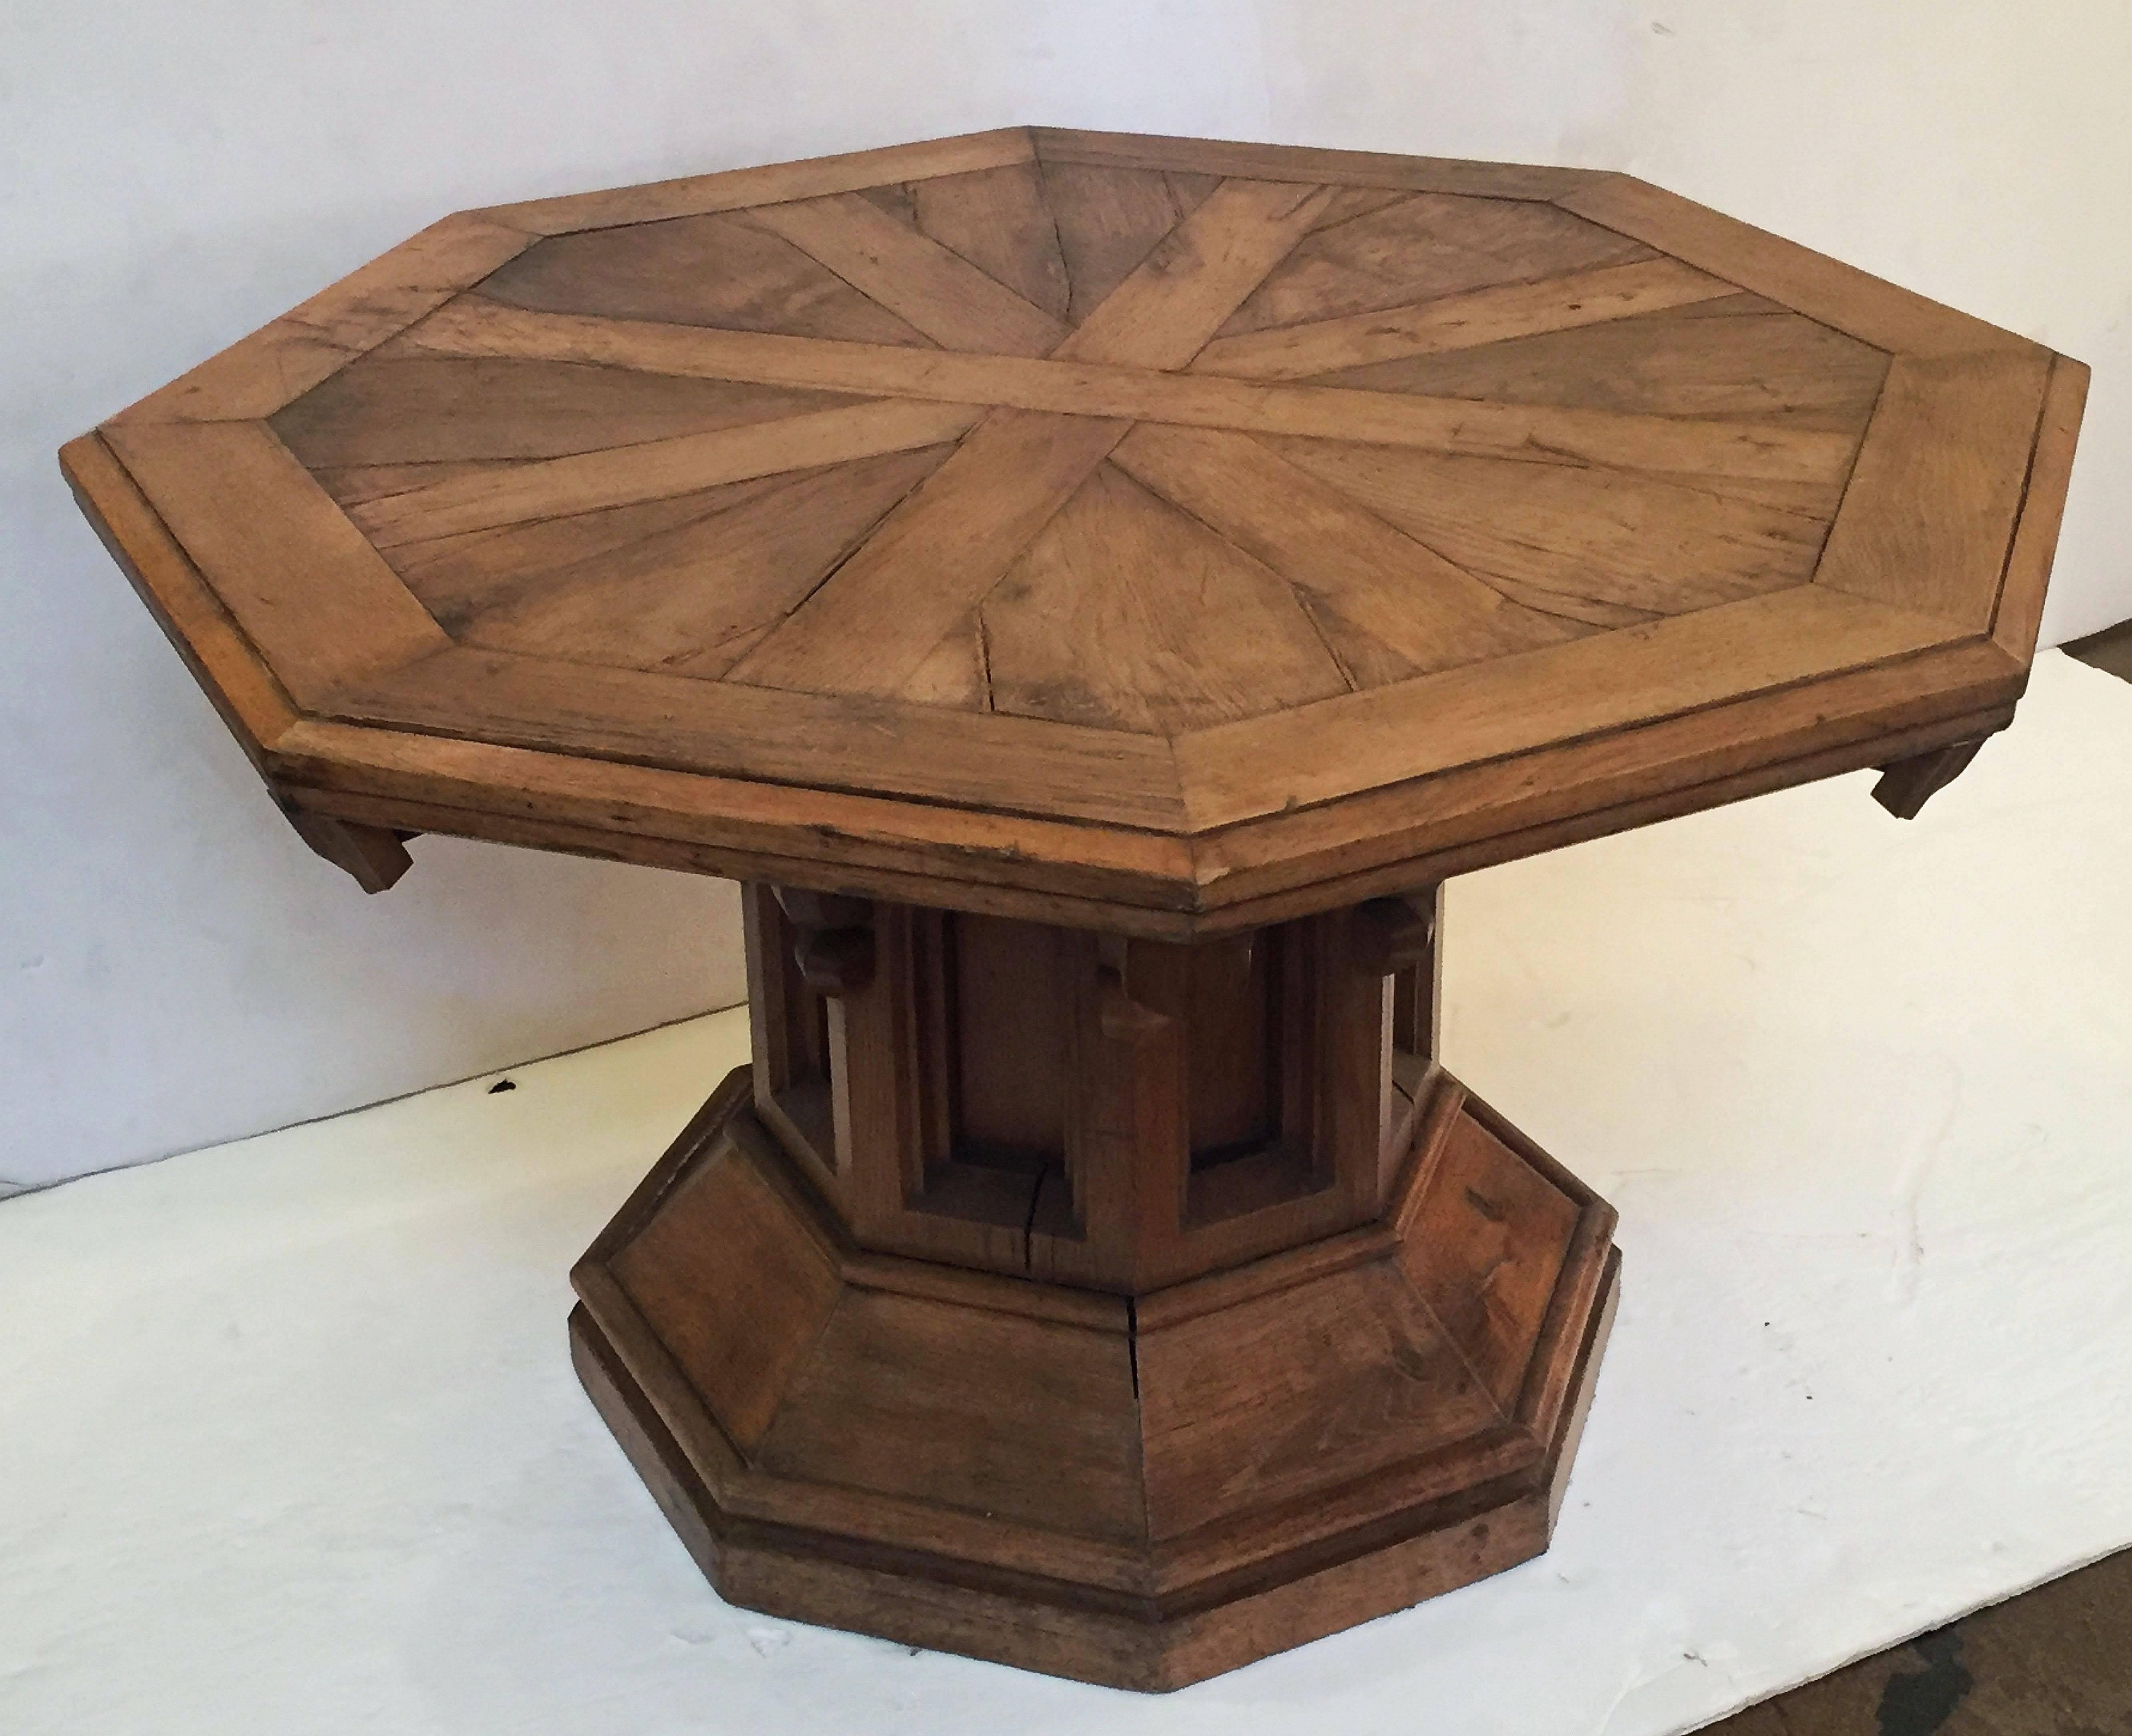 19th Century English Country House Center Table with Octagonal Top